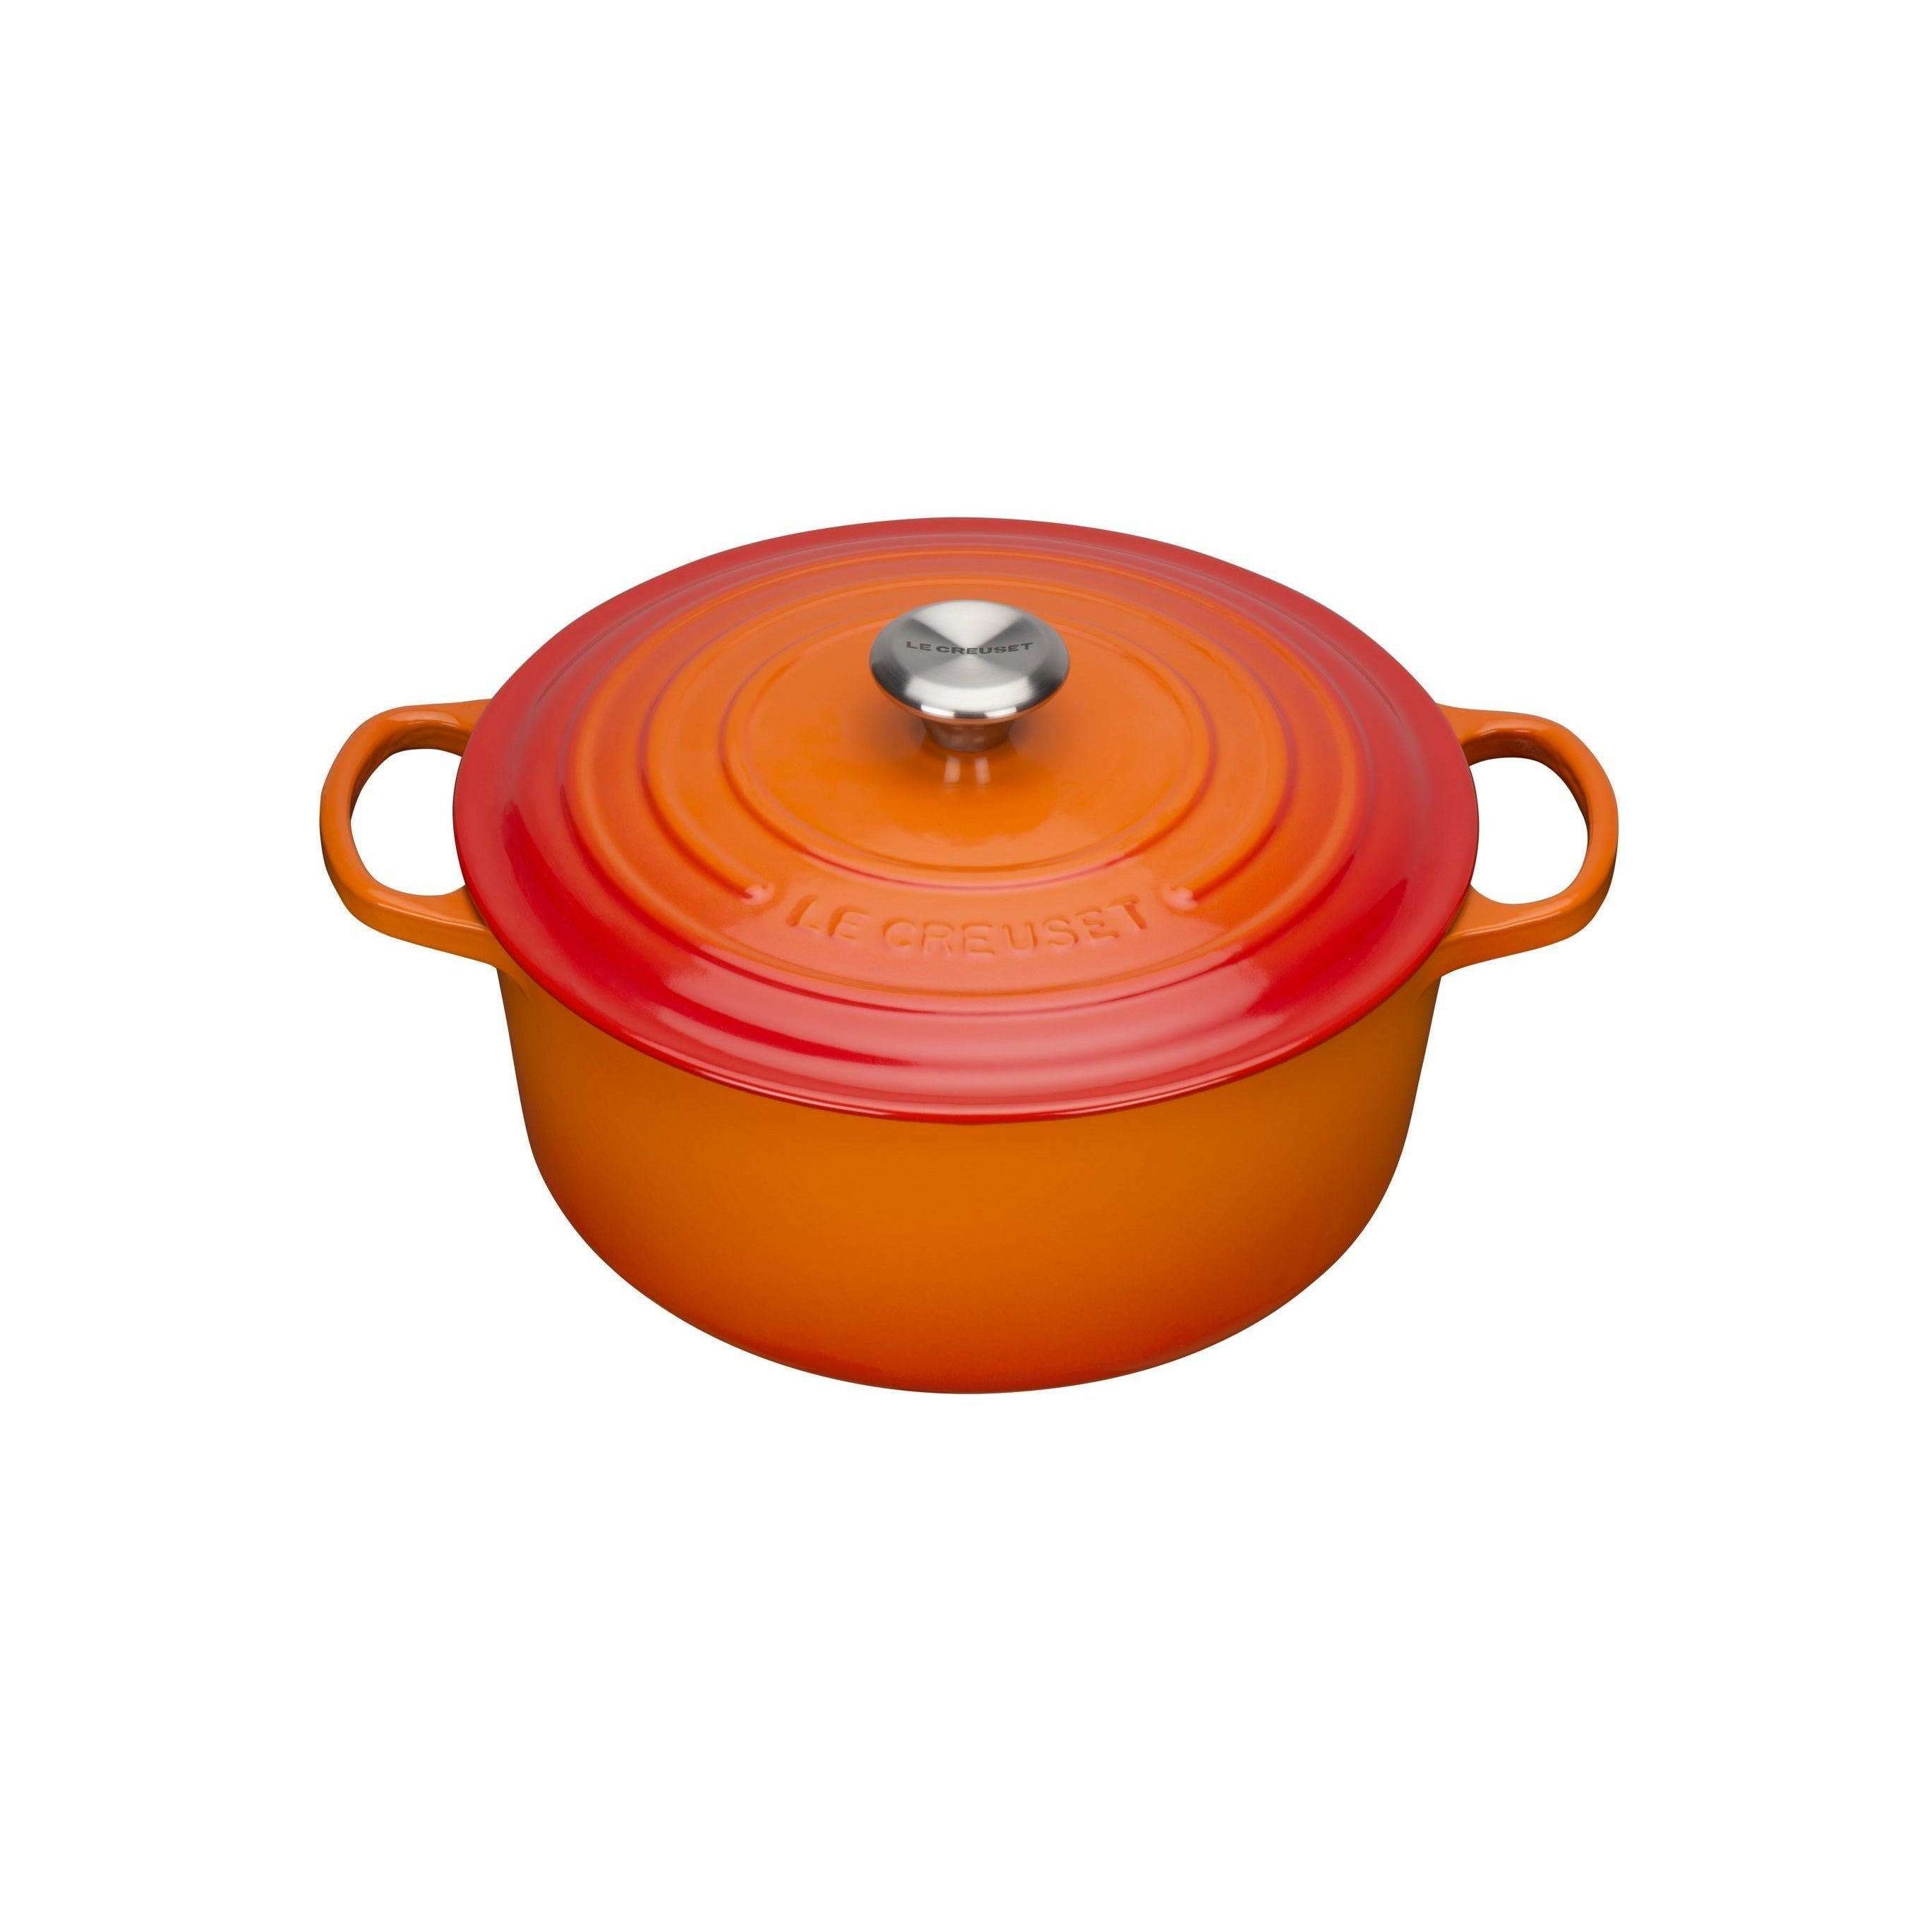 Le Creuset Signature Round Roaster 24 cm, oven rood